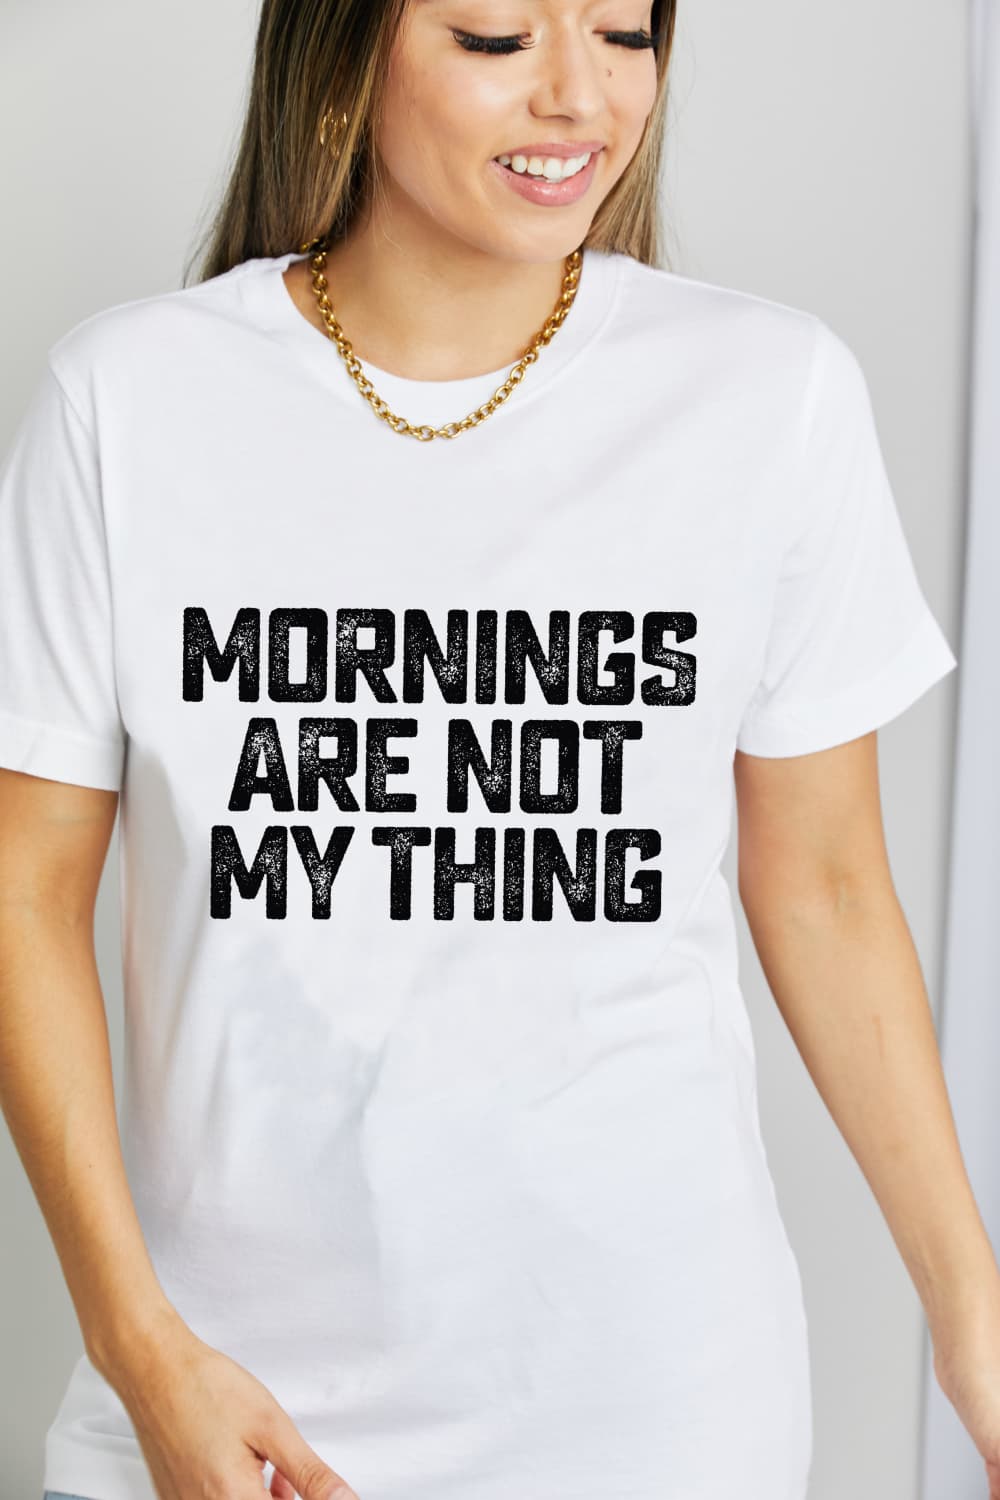 Simply Love Full Size MORNINGS ARE NOT MY THING Cotton T-Shirt (2 Colors)  Krazy Heart Designs Boutique Bleach S 